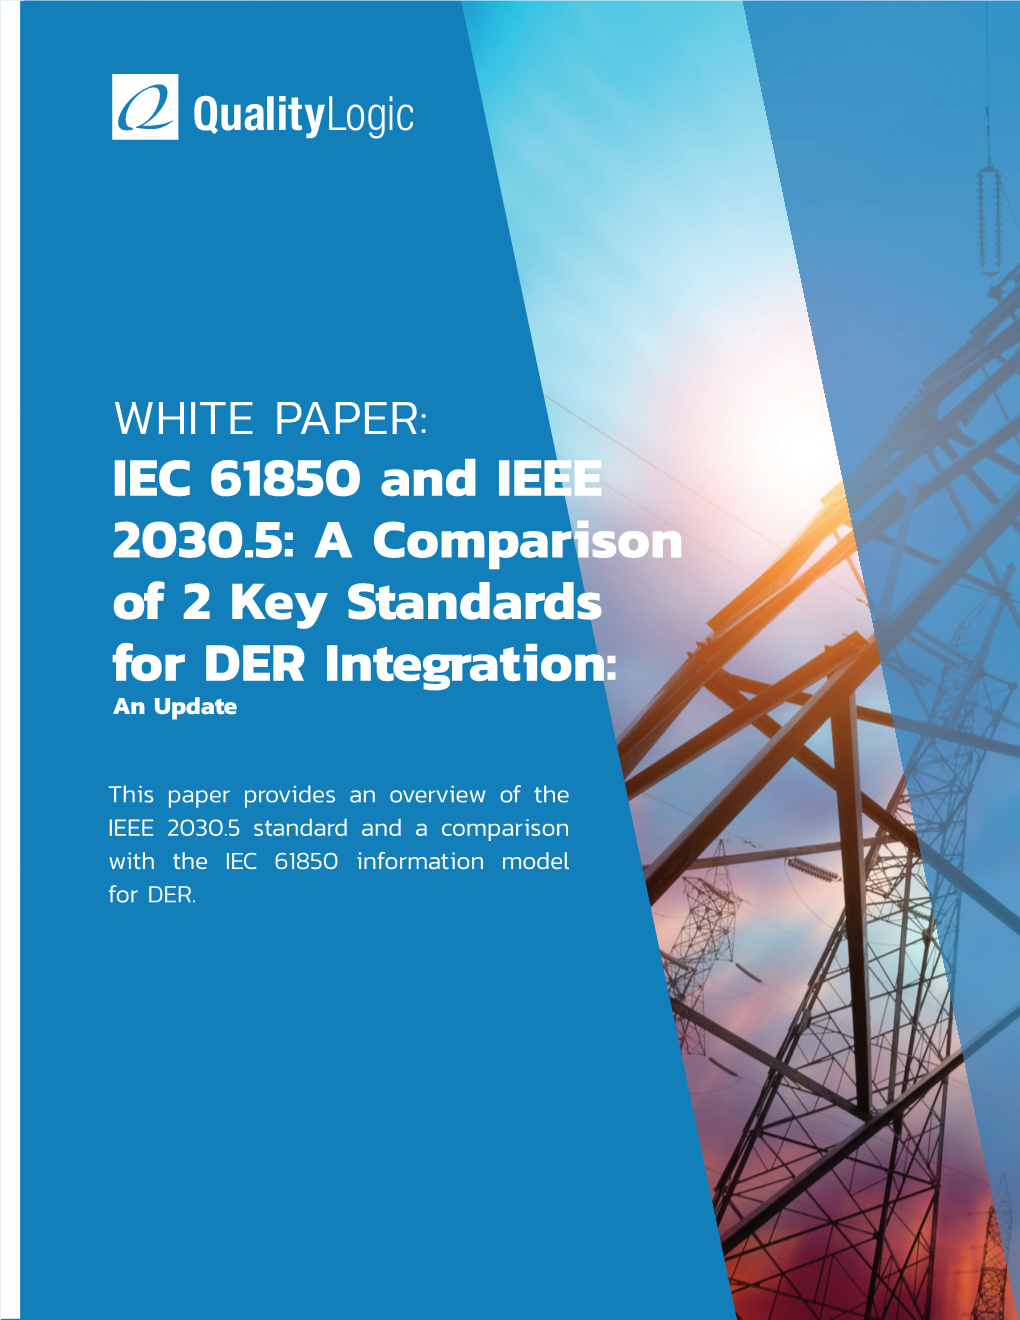 IEC 61850 and IEEE 2030.5: a Comparison of 2 Key Standards for DER Integration: an Update